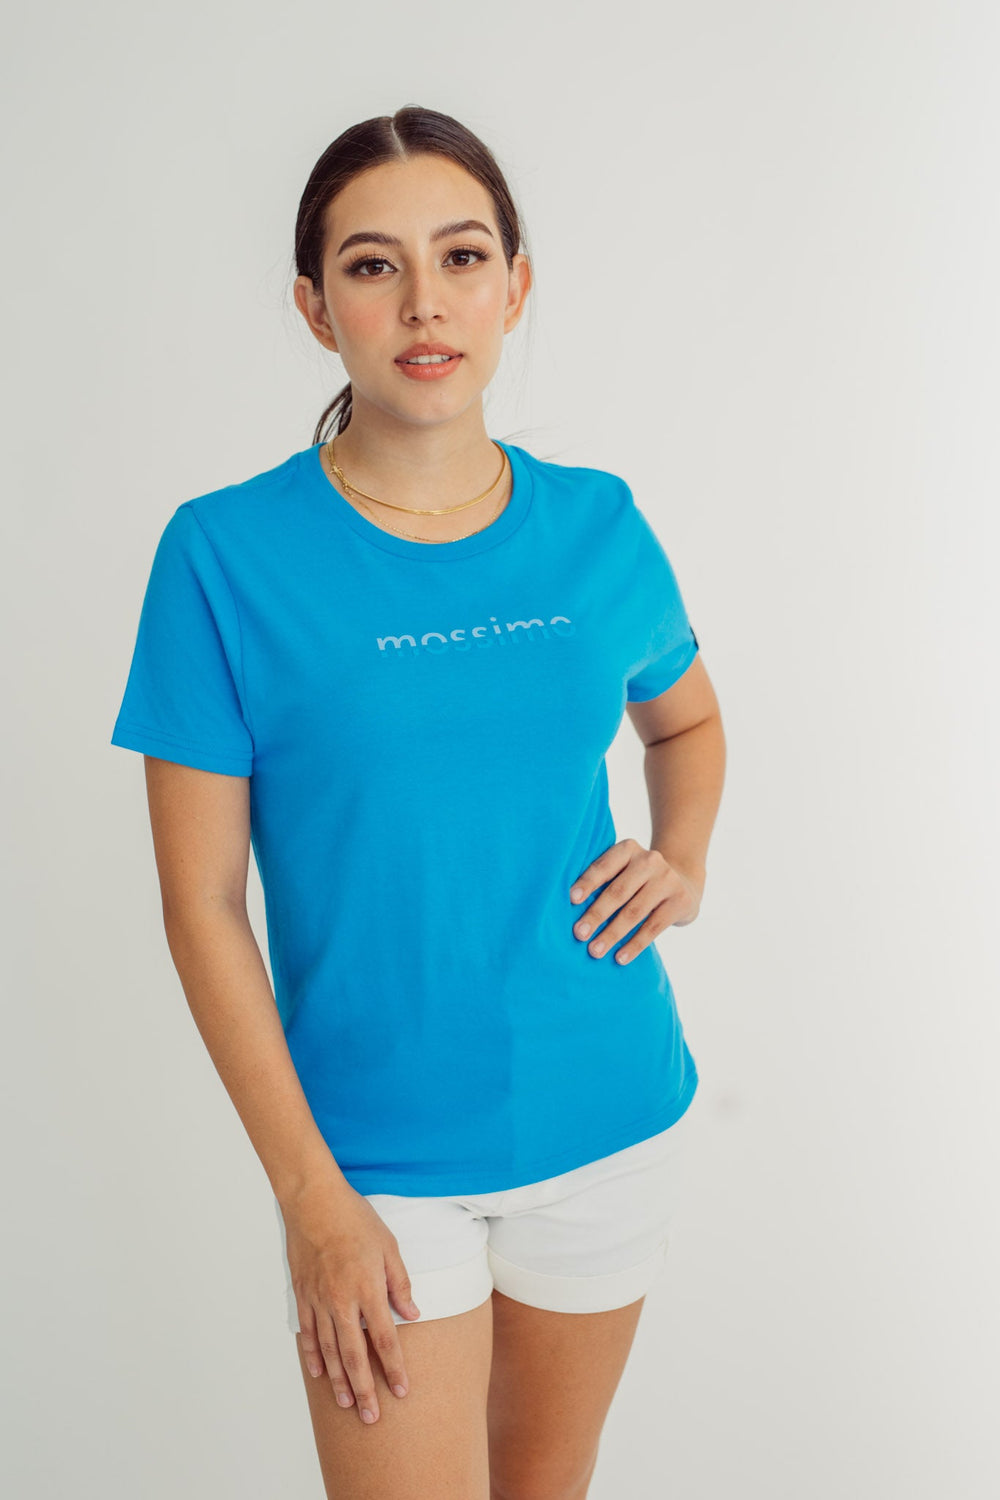 Malibu Blue with Big Branding Flat Print and Silicone Gel Classic Fit Tee - Mossimo PH